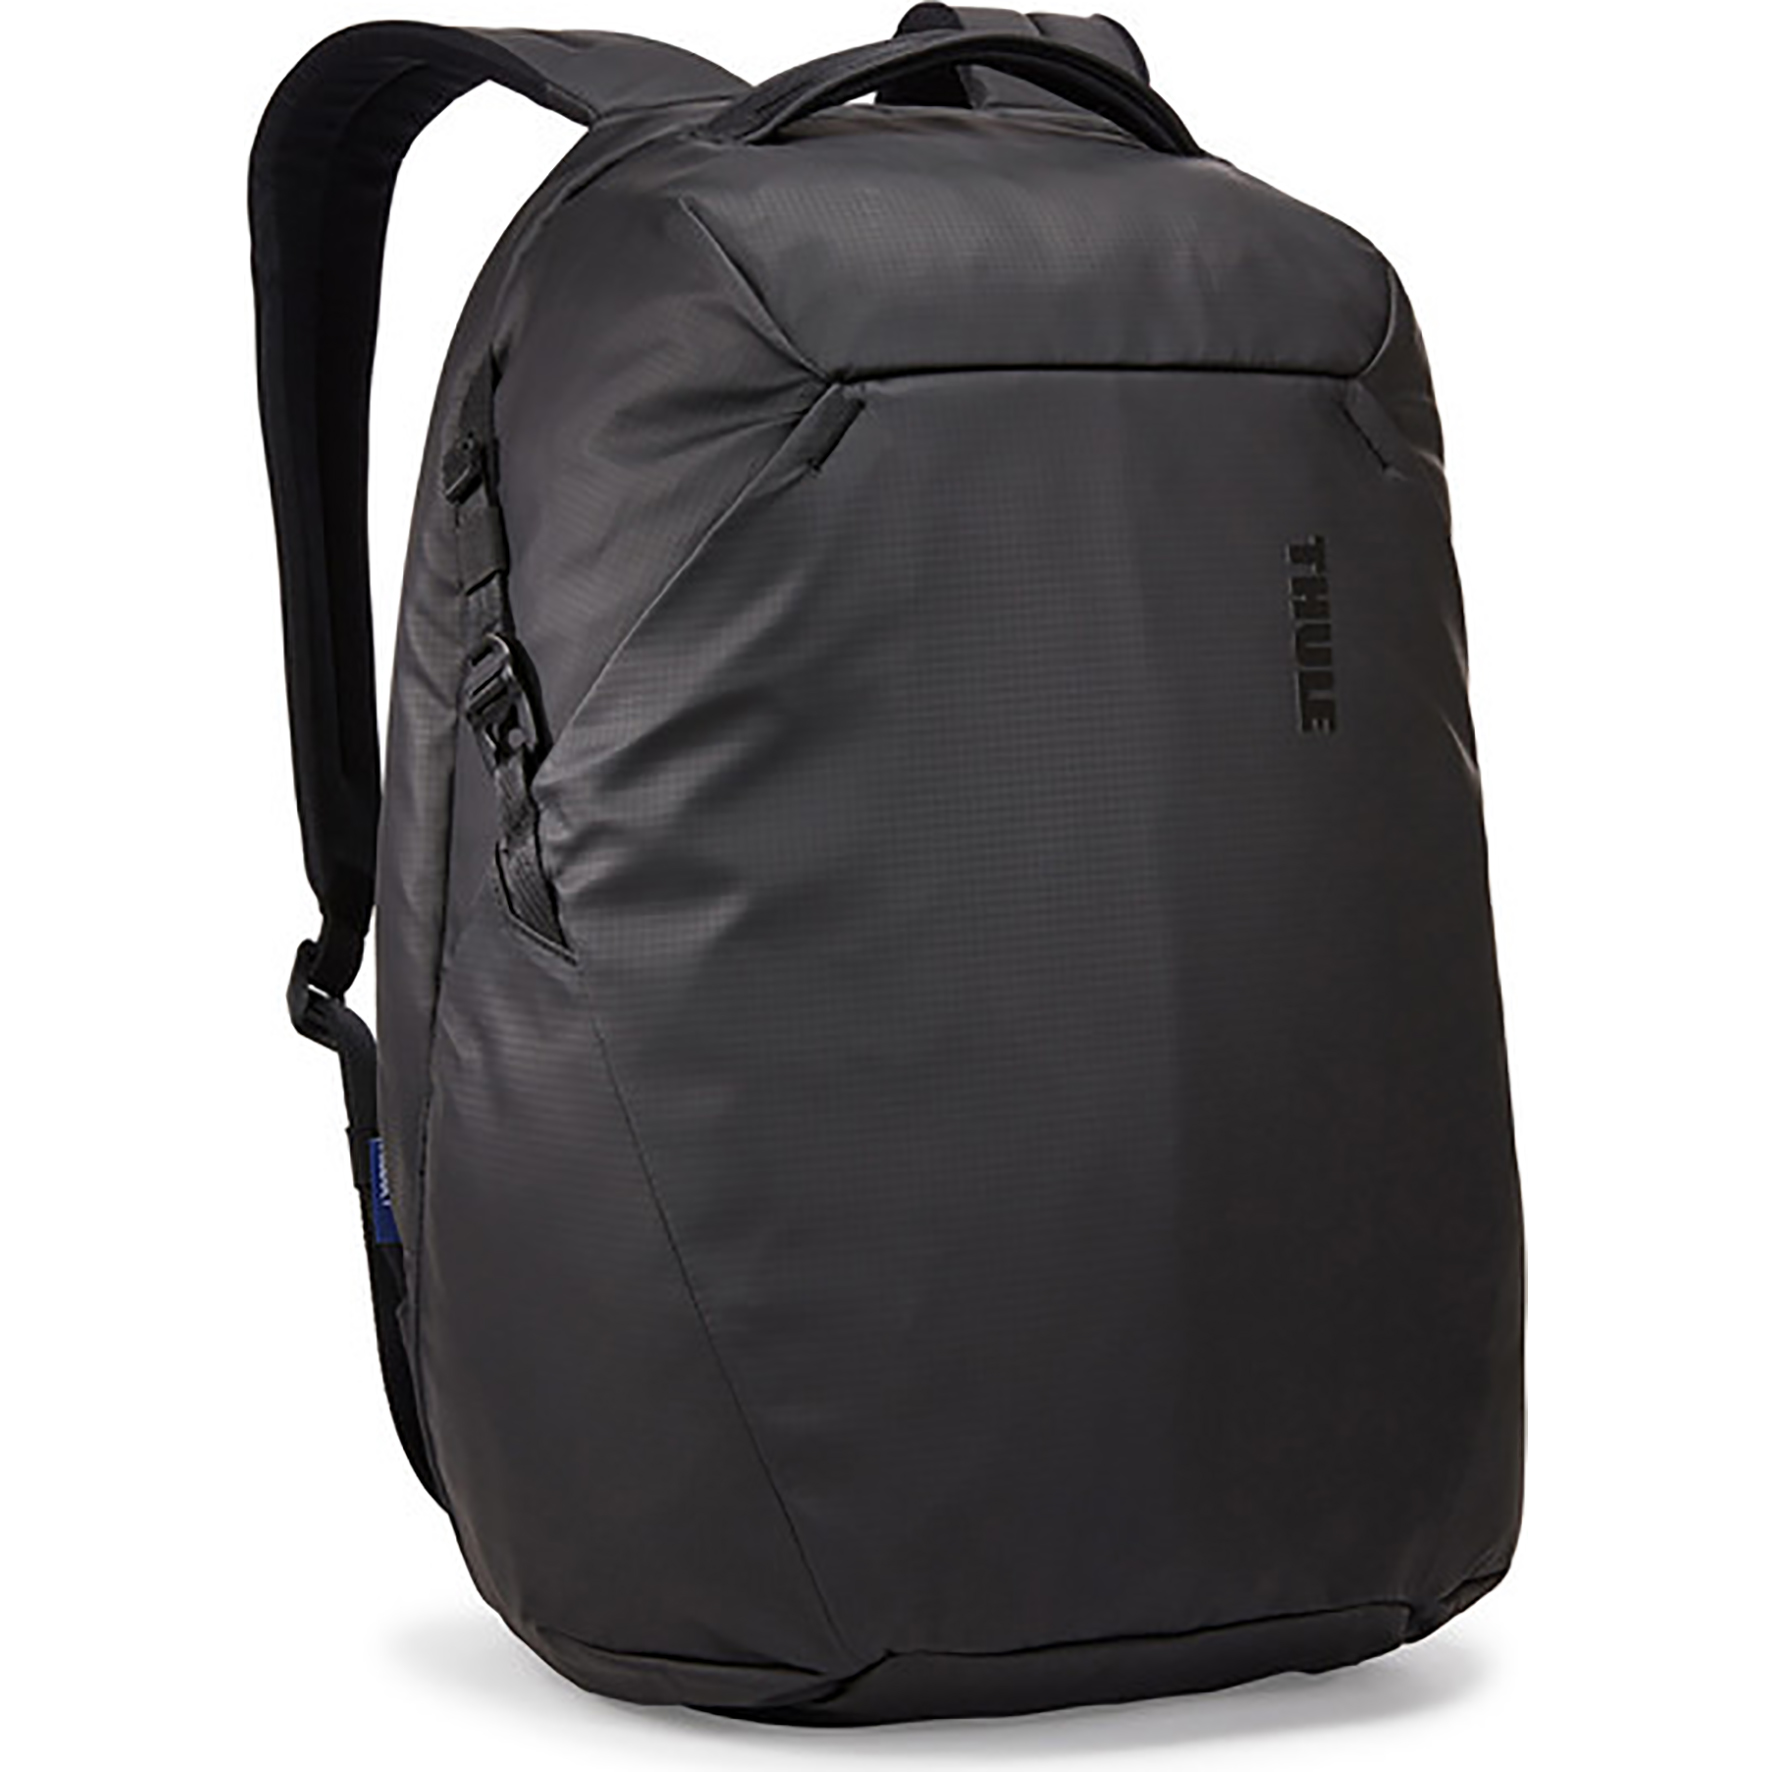 [8559520] Tact Backpack 21L